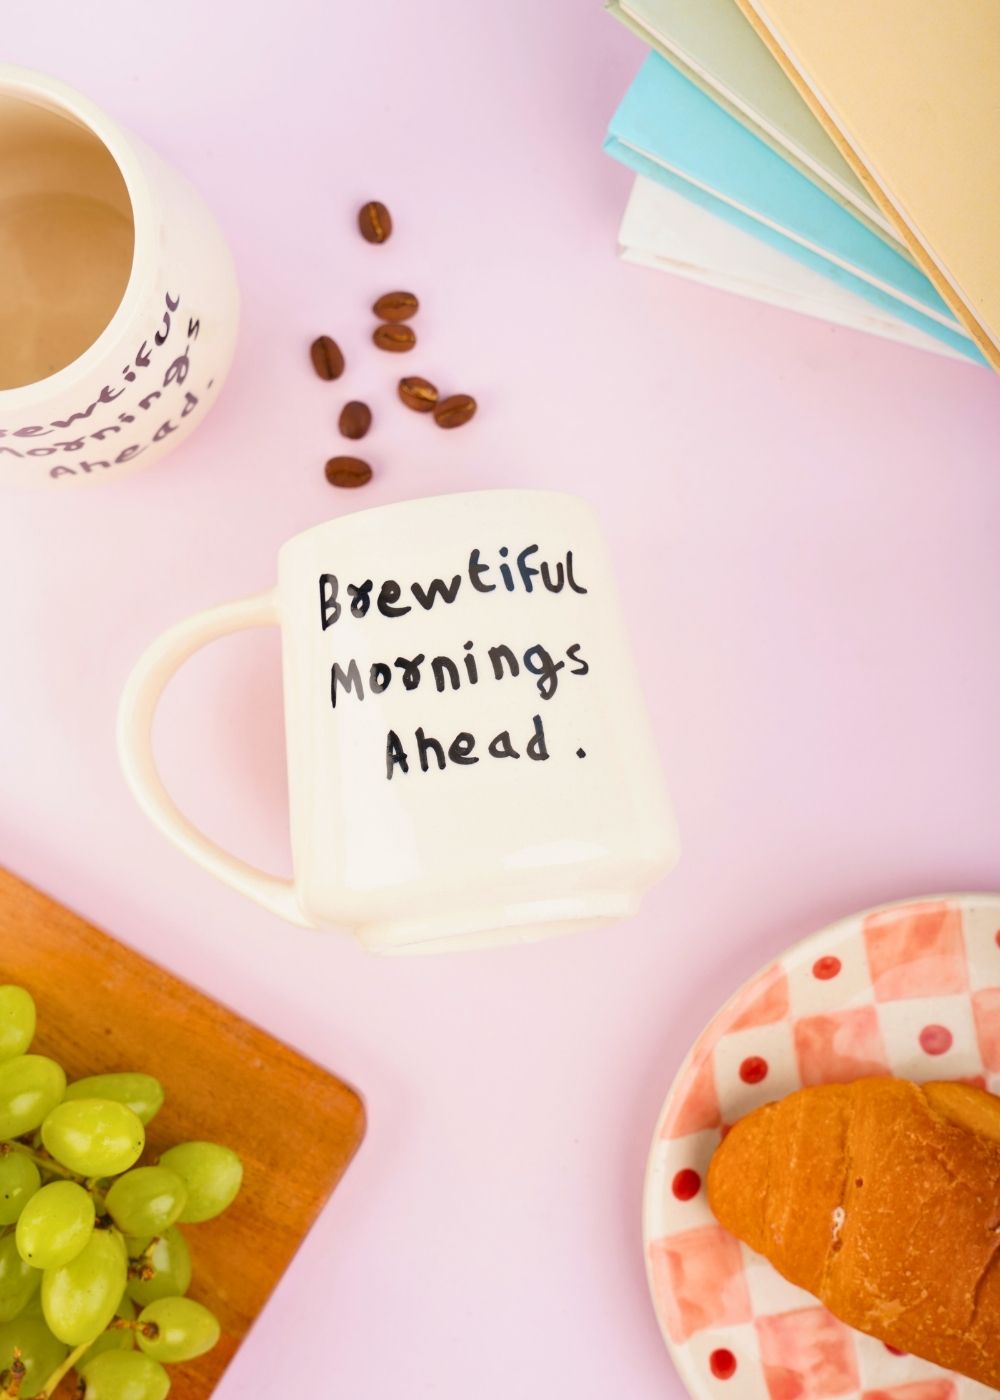 for make your morning special with this coffee mug